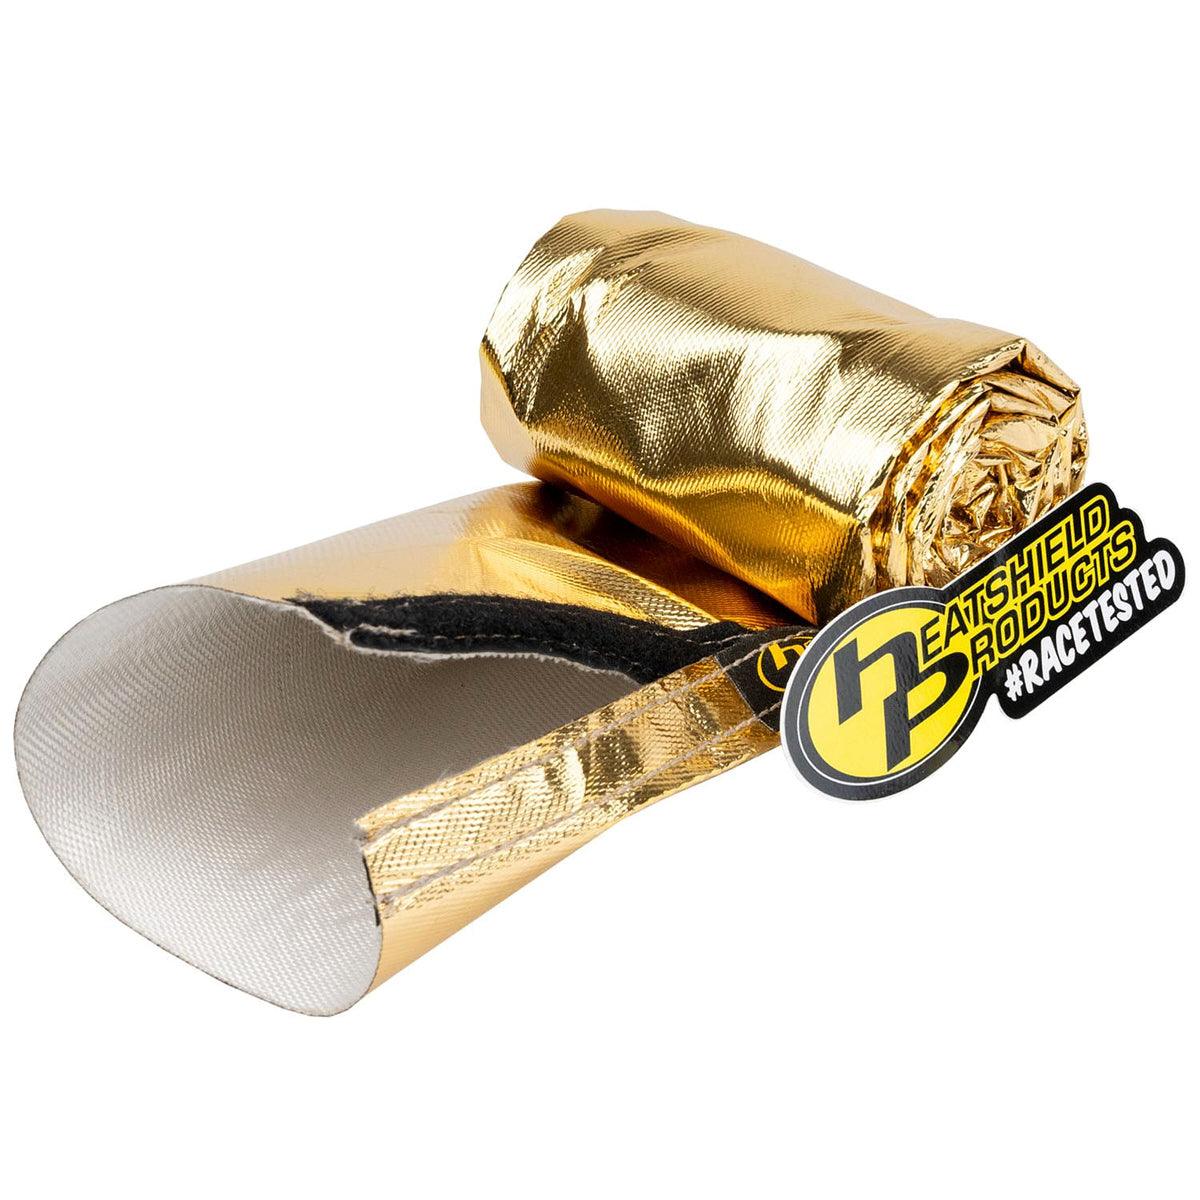 Cold-Gold Sleeve 2-1/2in ID x 3ft - Burlile Performance Products